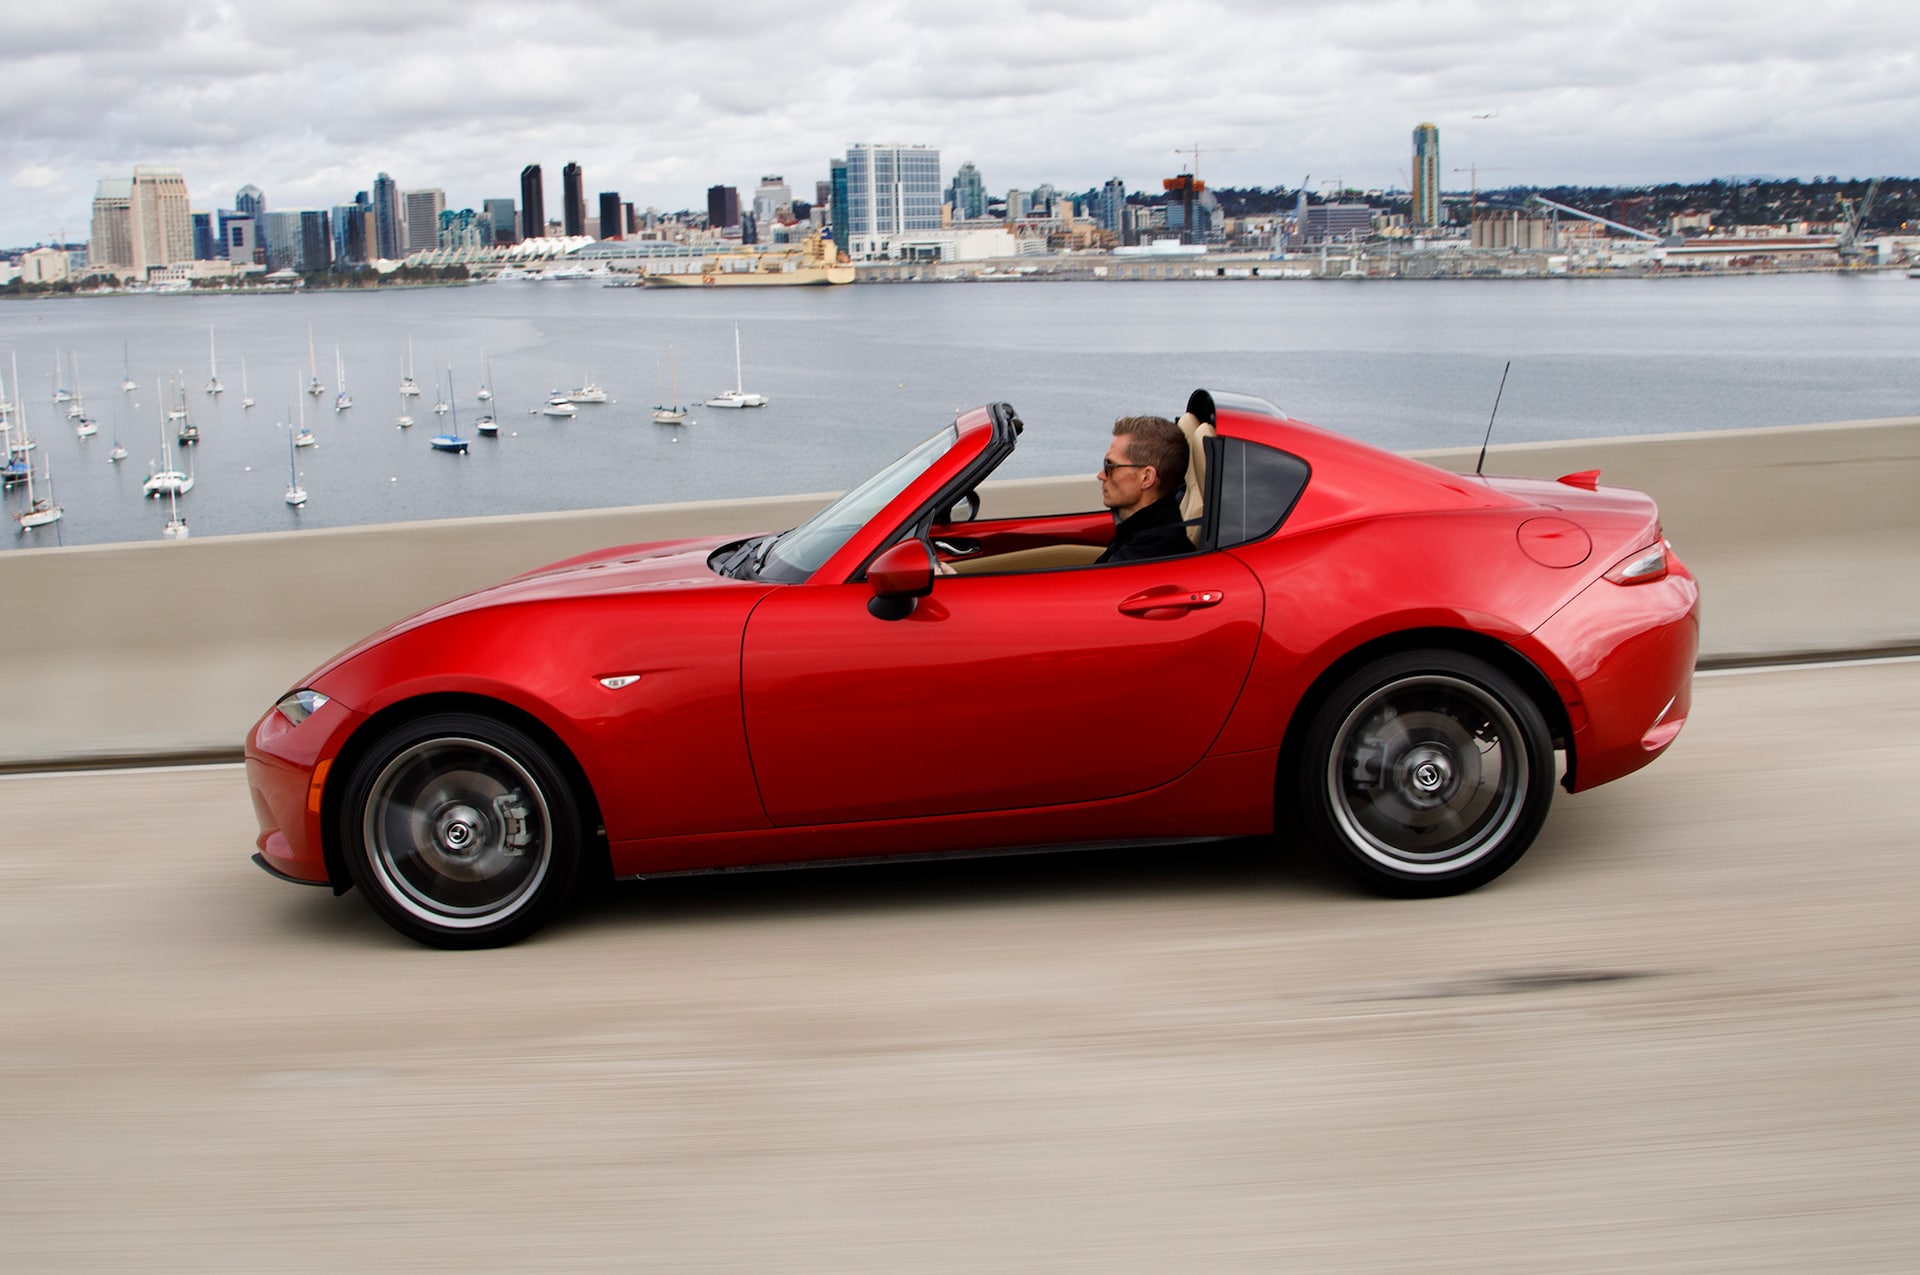 2017 Mazda MX-5 Miata RF Automatic Review: 8 Things to Know